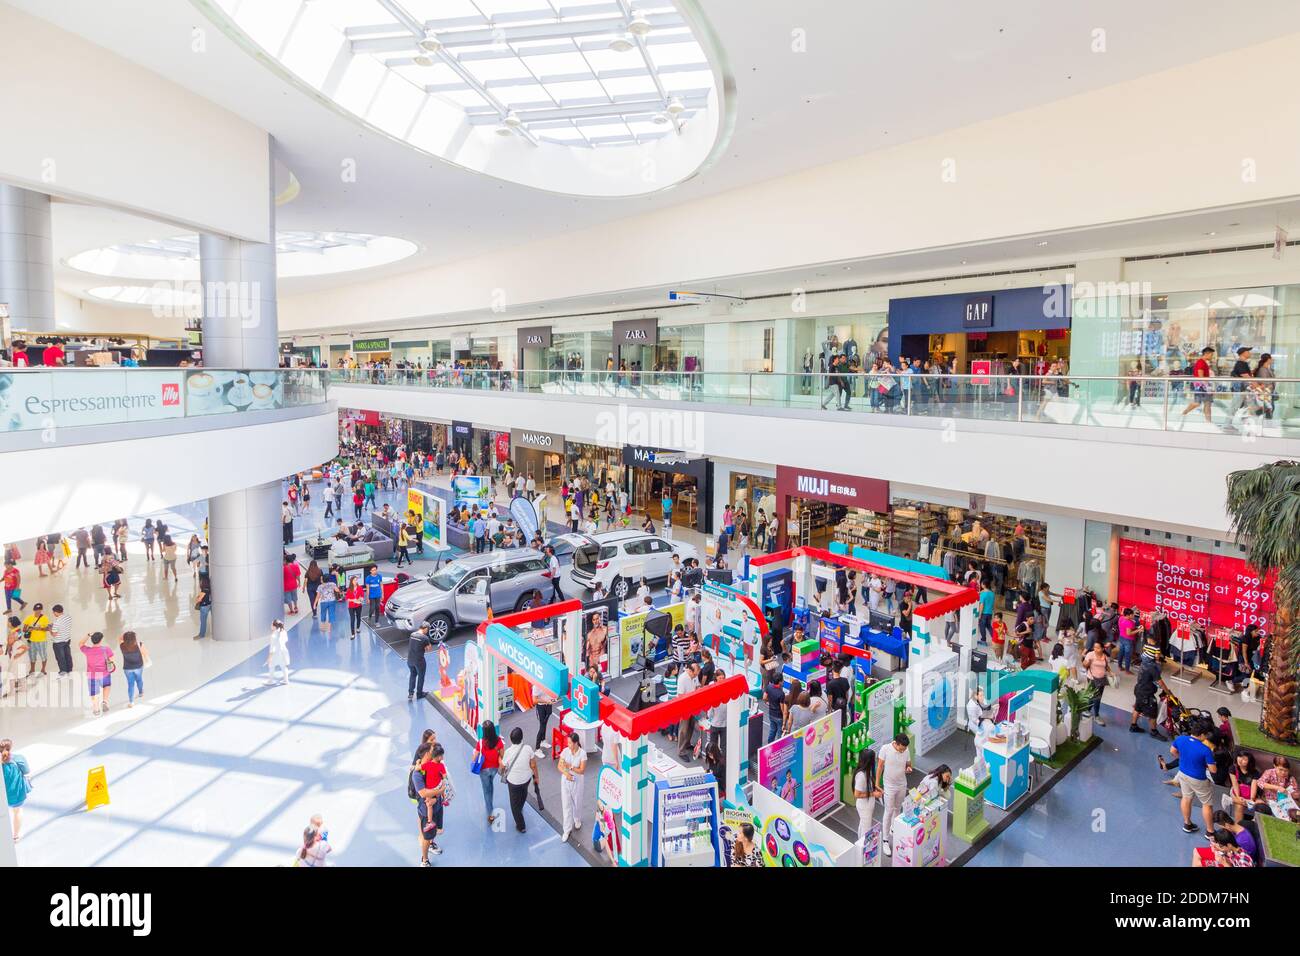 A crowded mall in Manila, Philippines Stock Photo